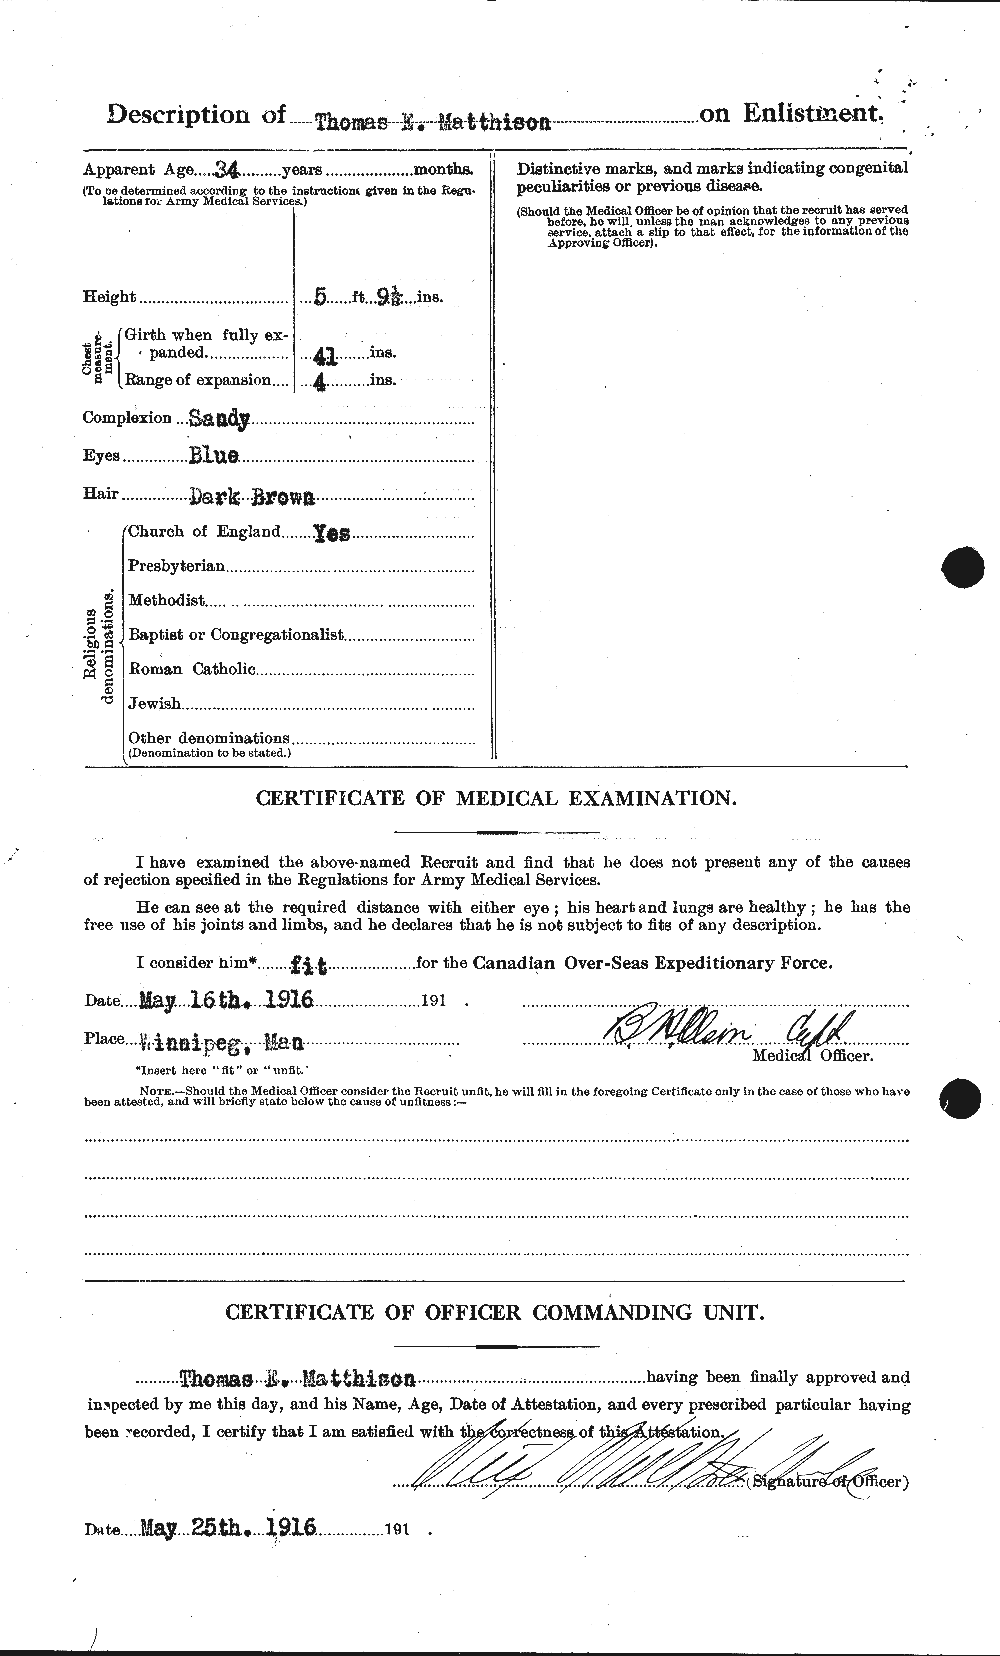 Personnel Records of the First World War - CEF 484078b